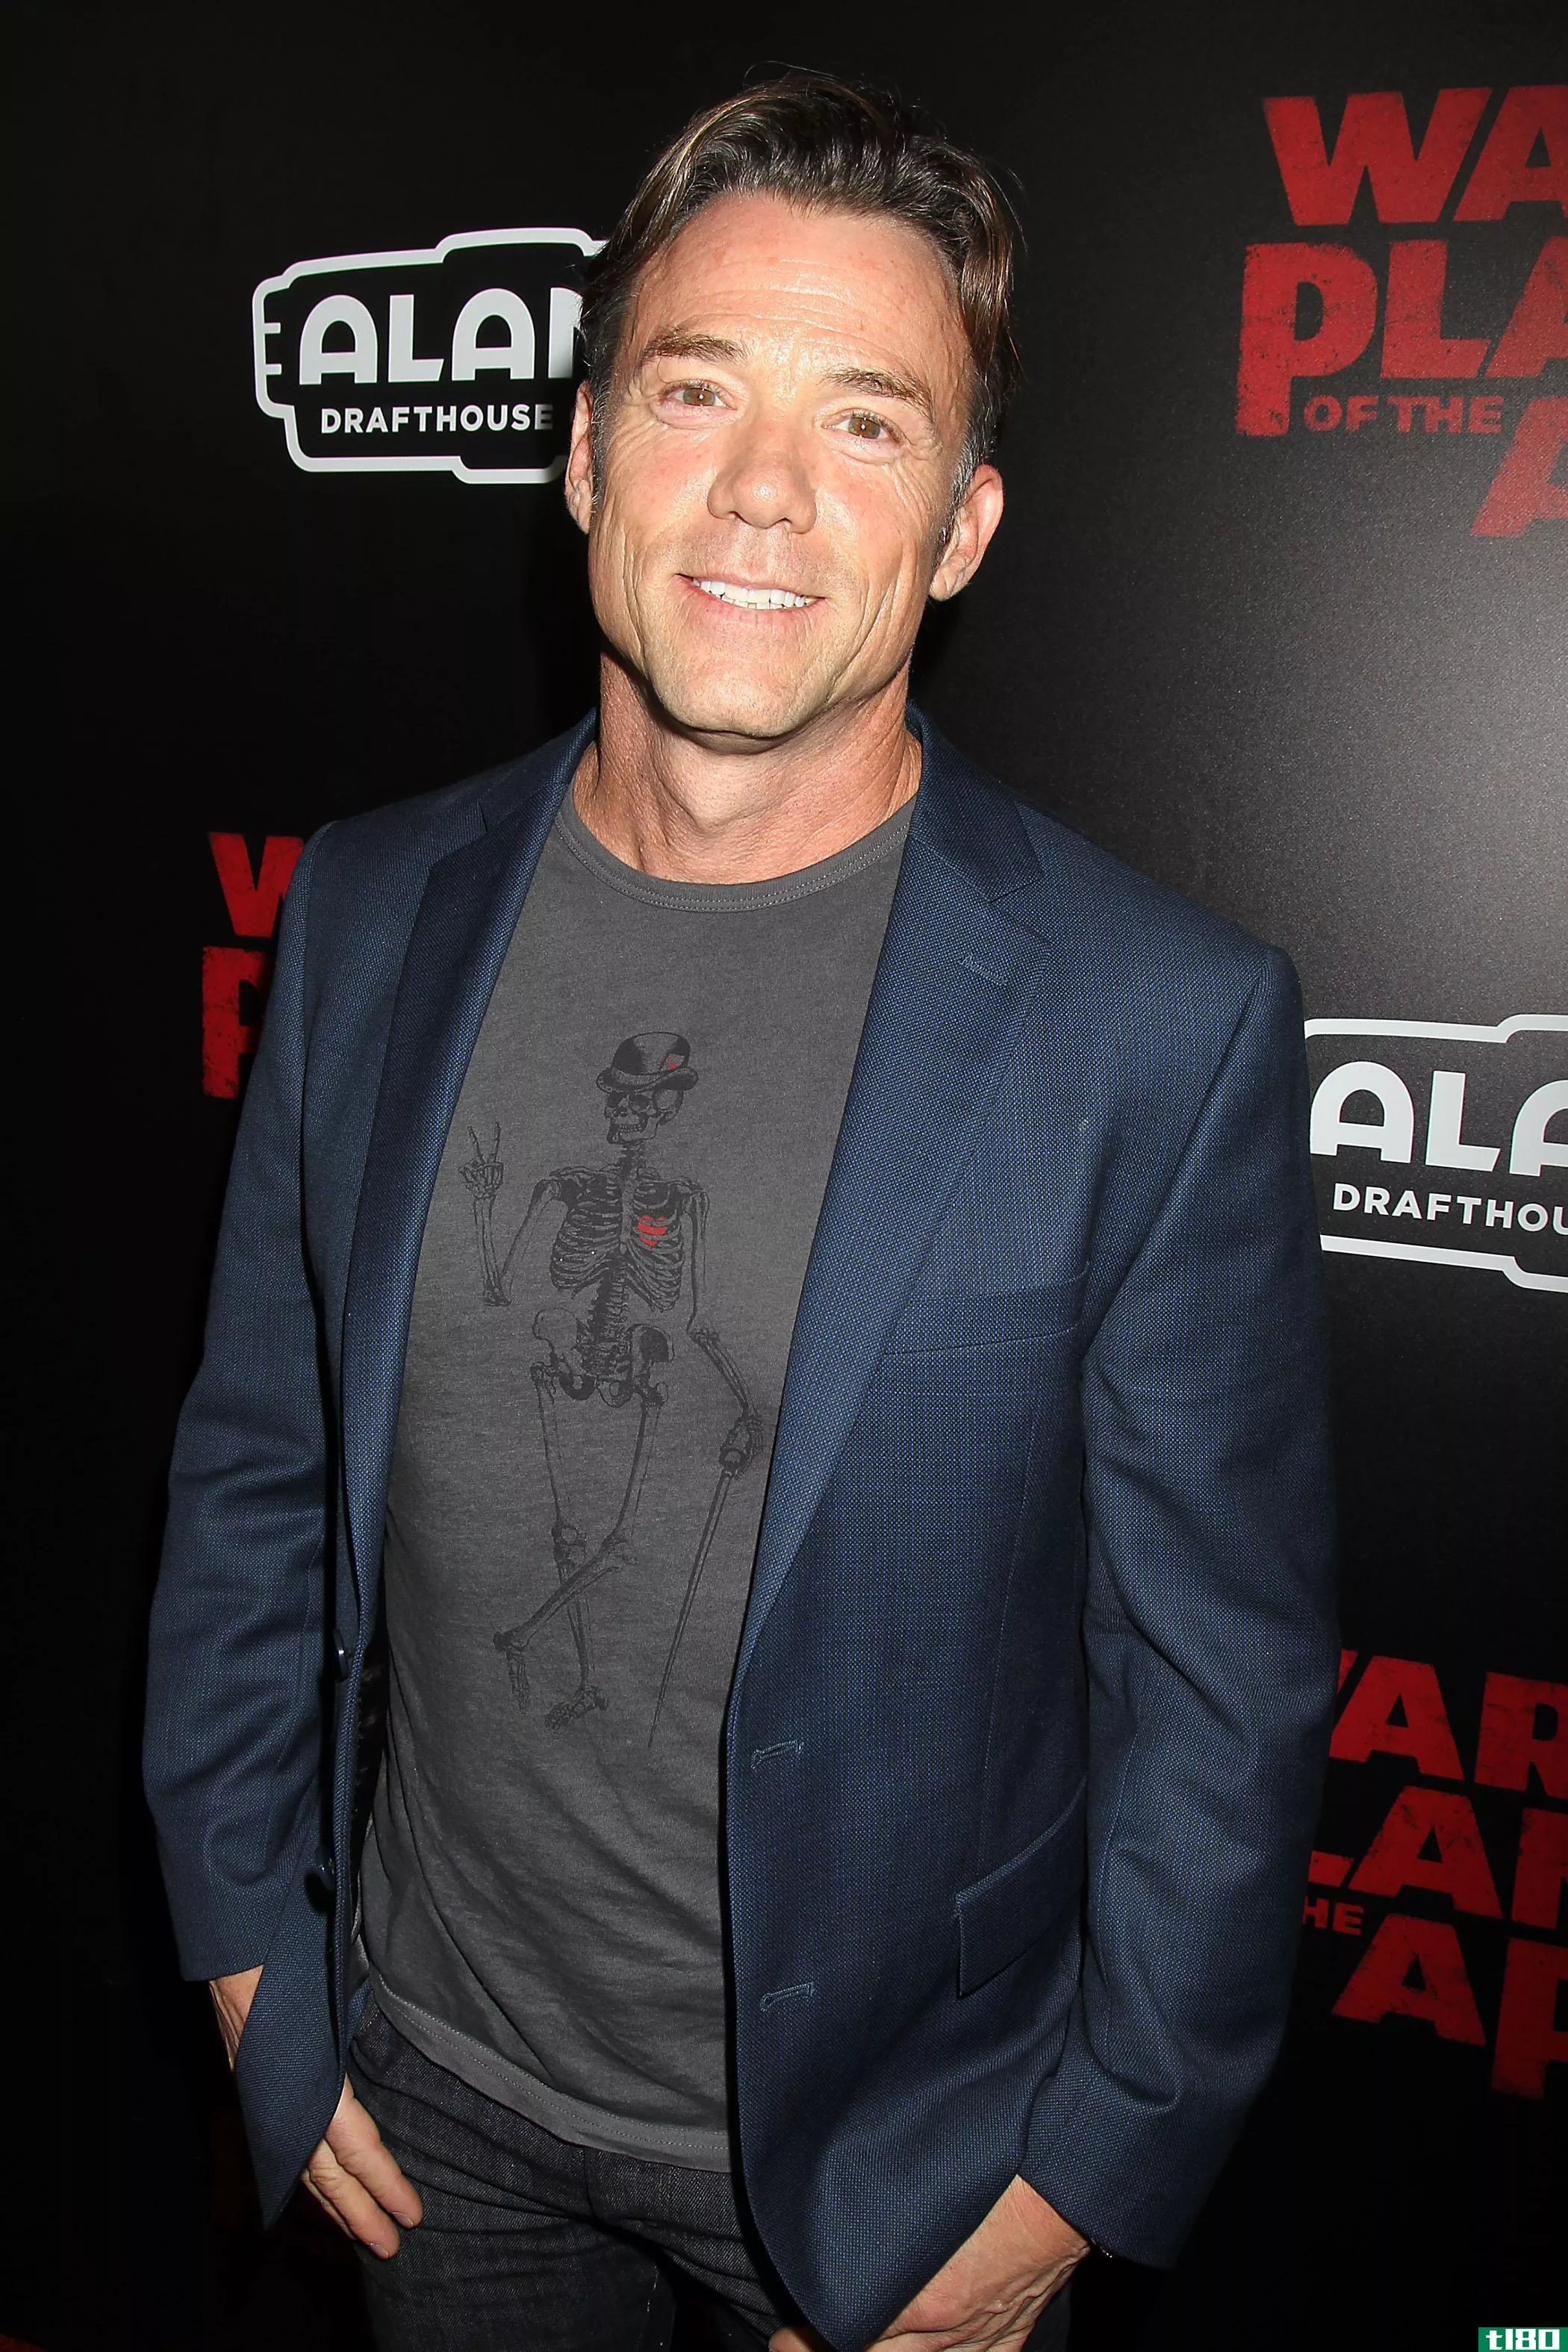 Planet of the Apes movement coordinator Terry Notary coached the actors on ape movement, and played Rocket the chimp.